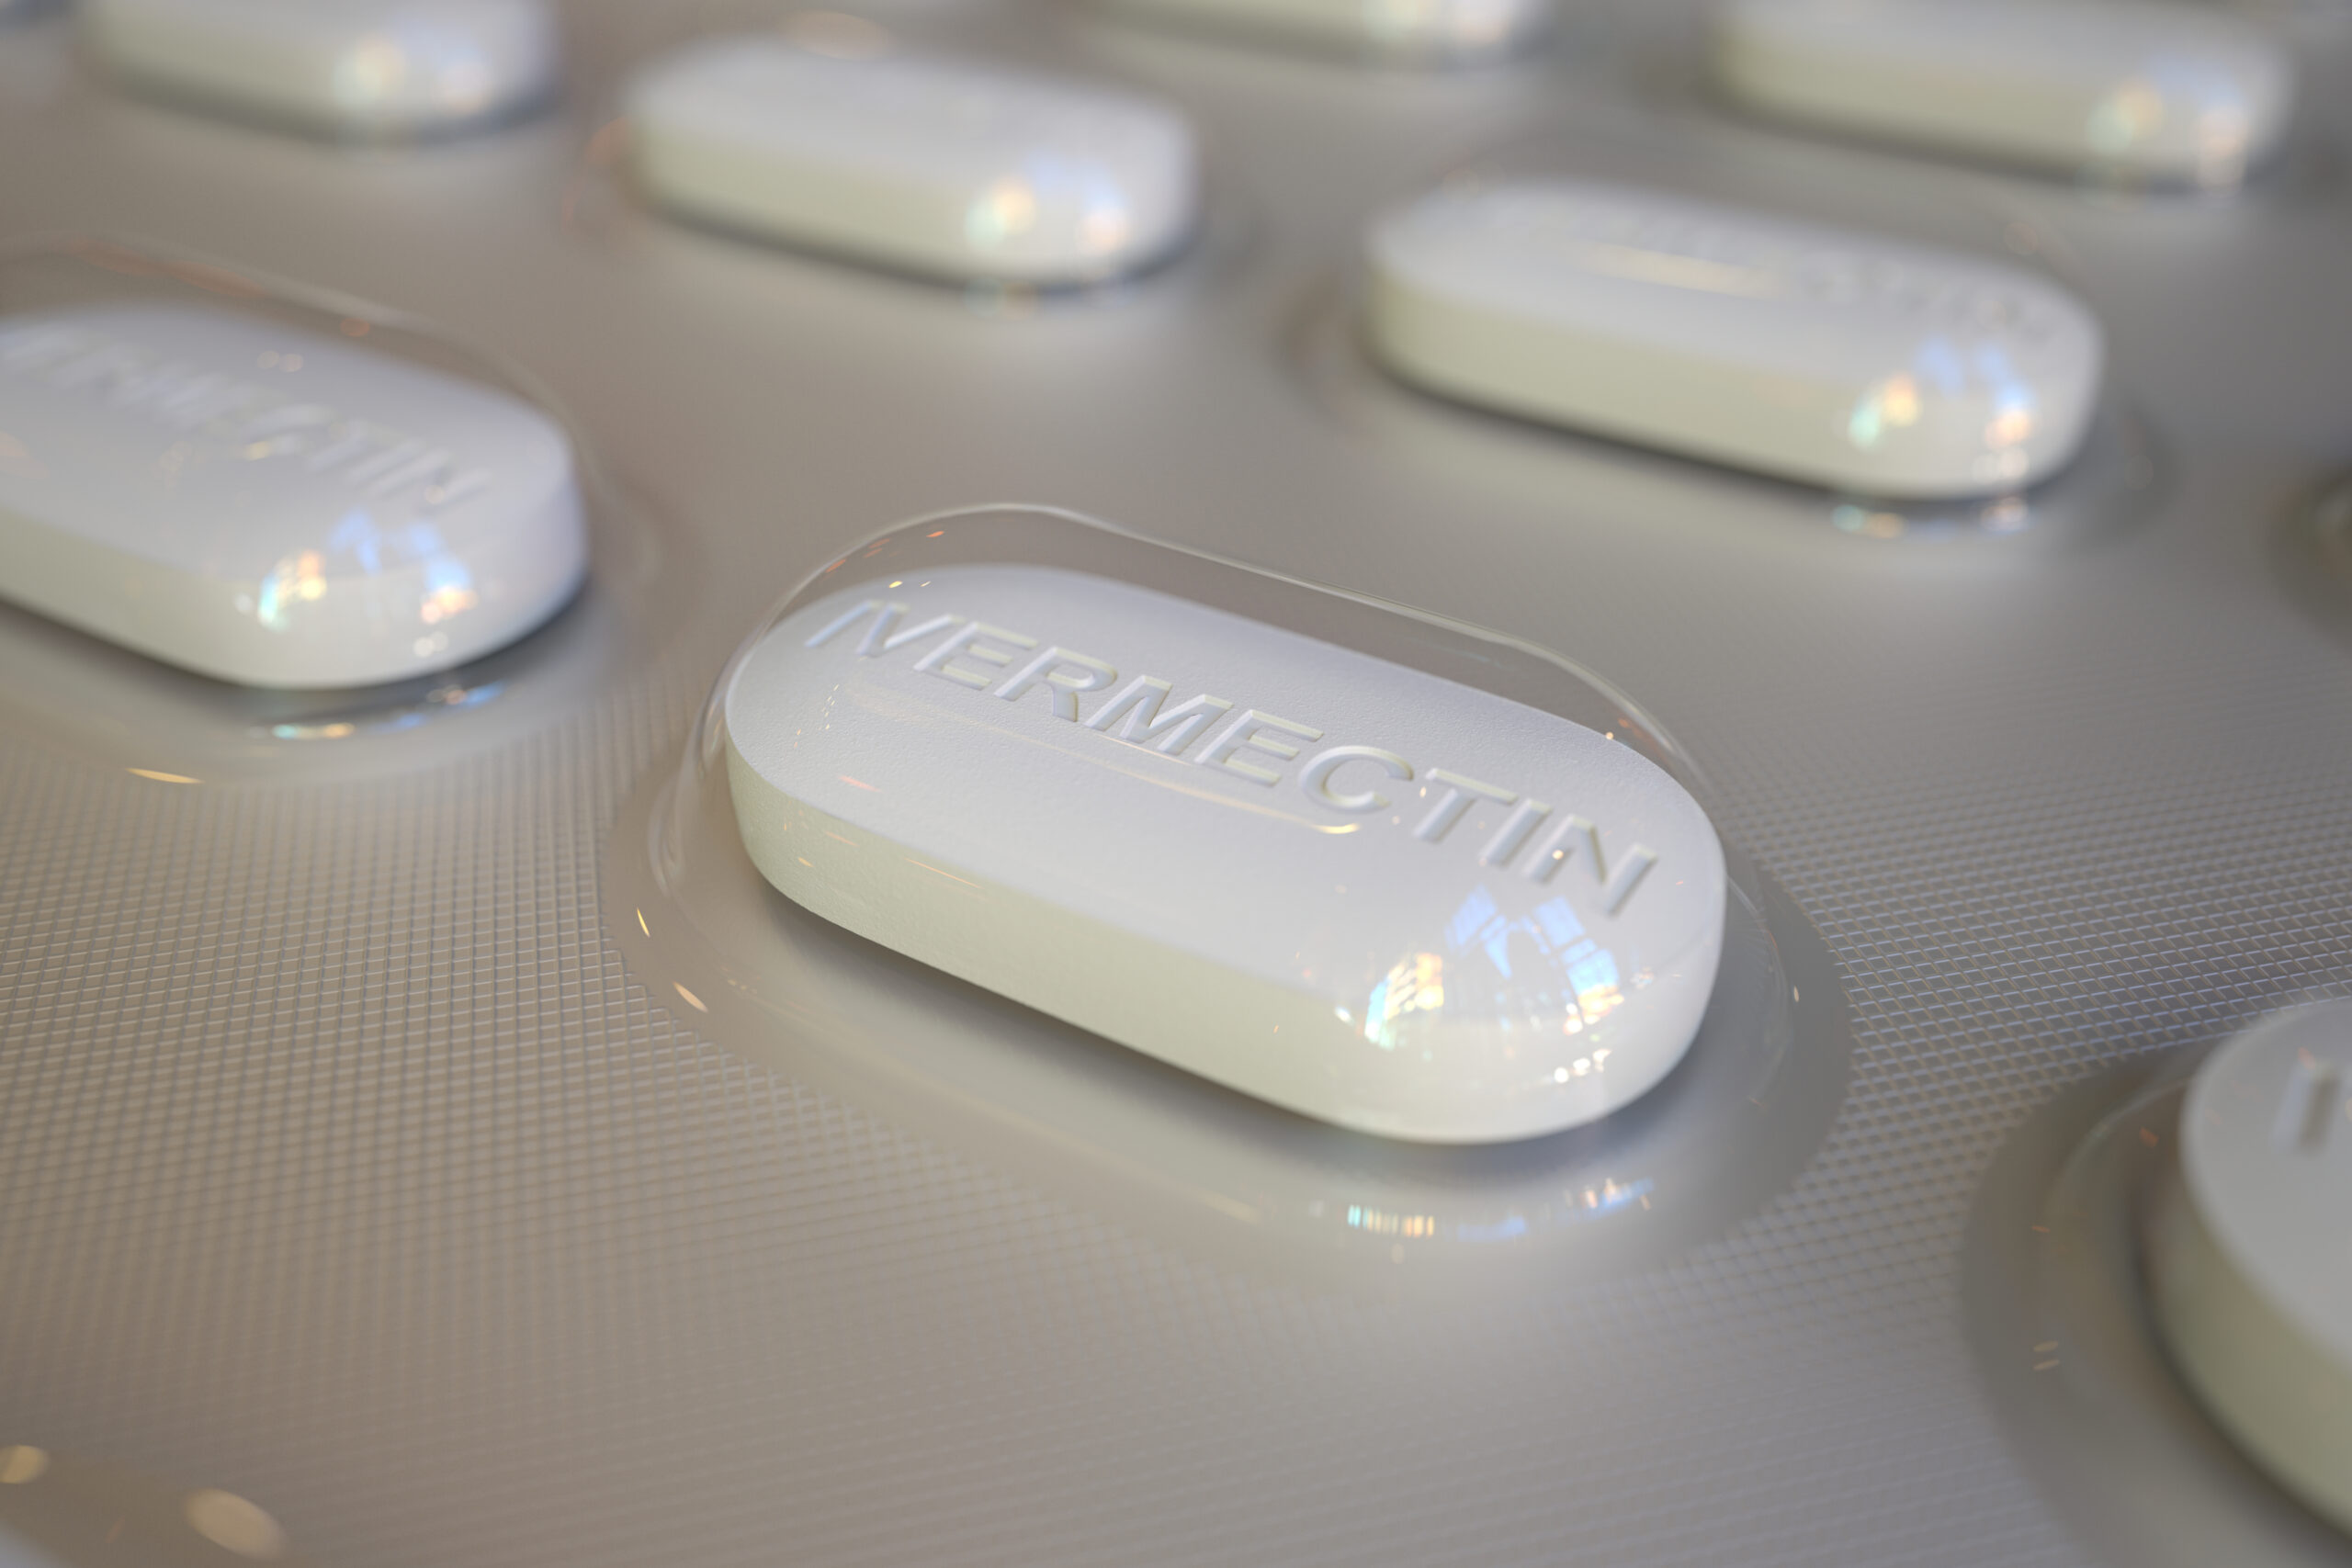 FDA Quietly Changed Ivermectin Warning After Criticism – Commentary